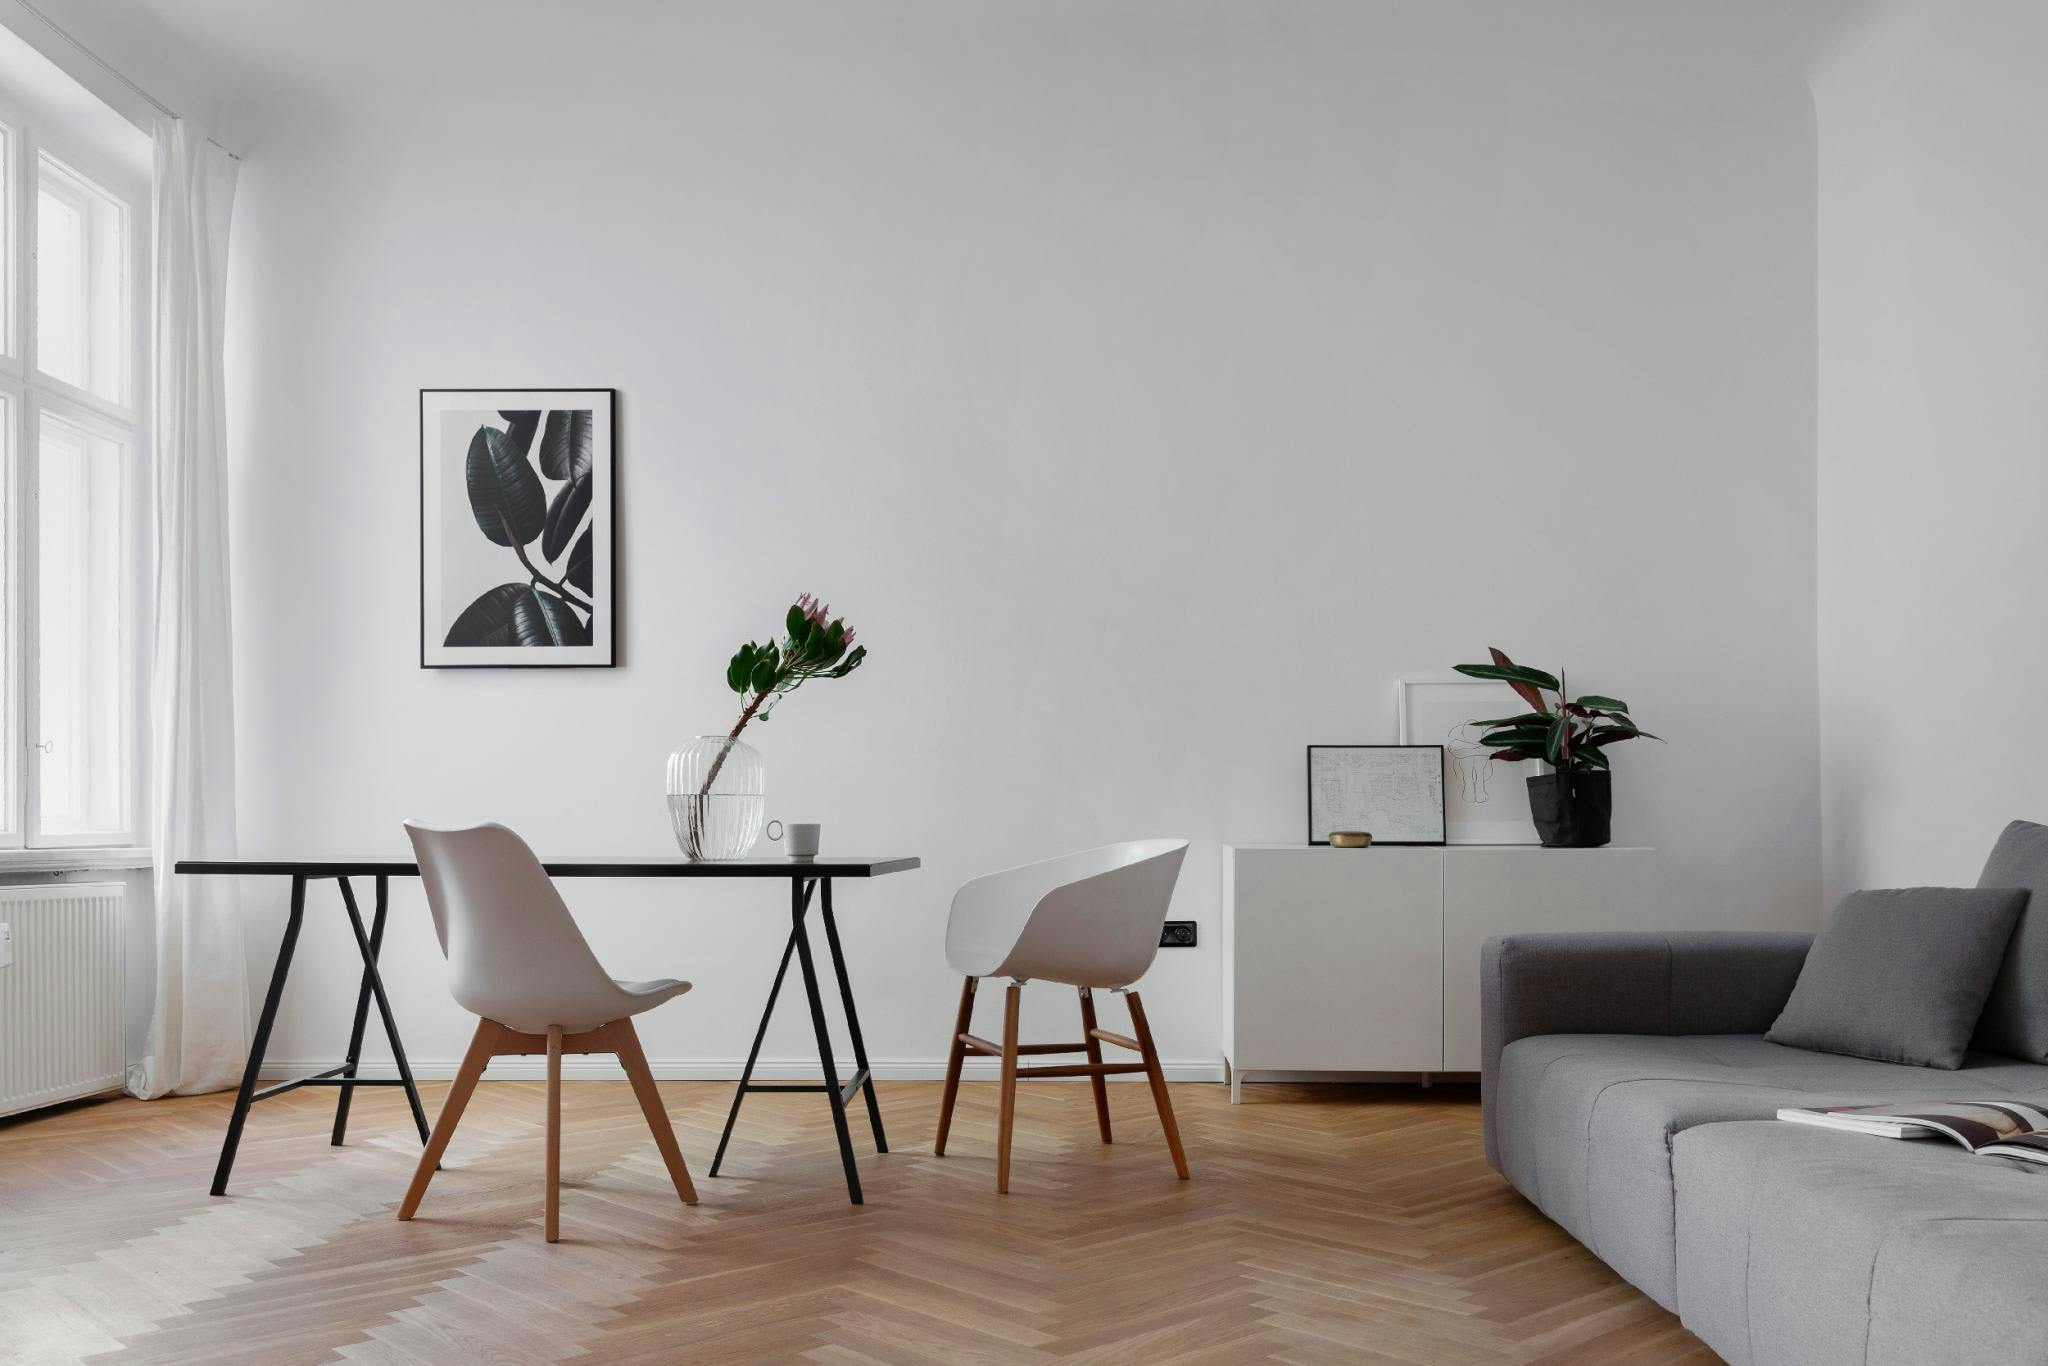 The image features a modern, white living room with a dining table and chairs, a couch, a potted plant, and a vase.